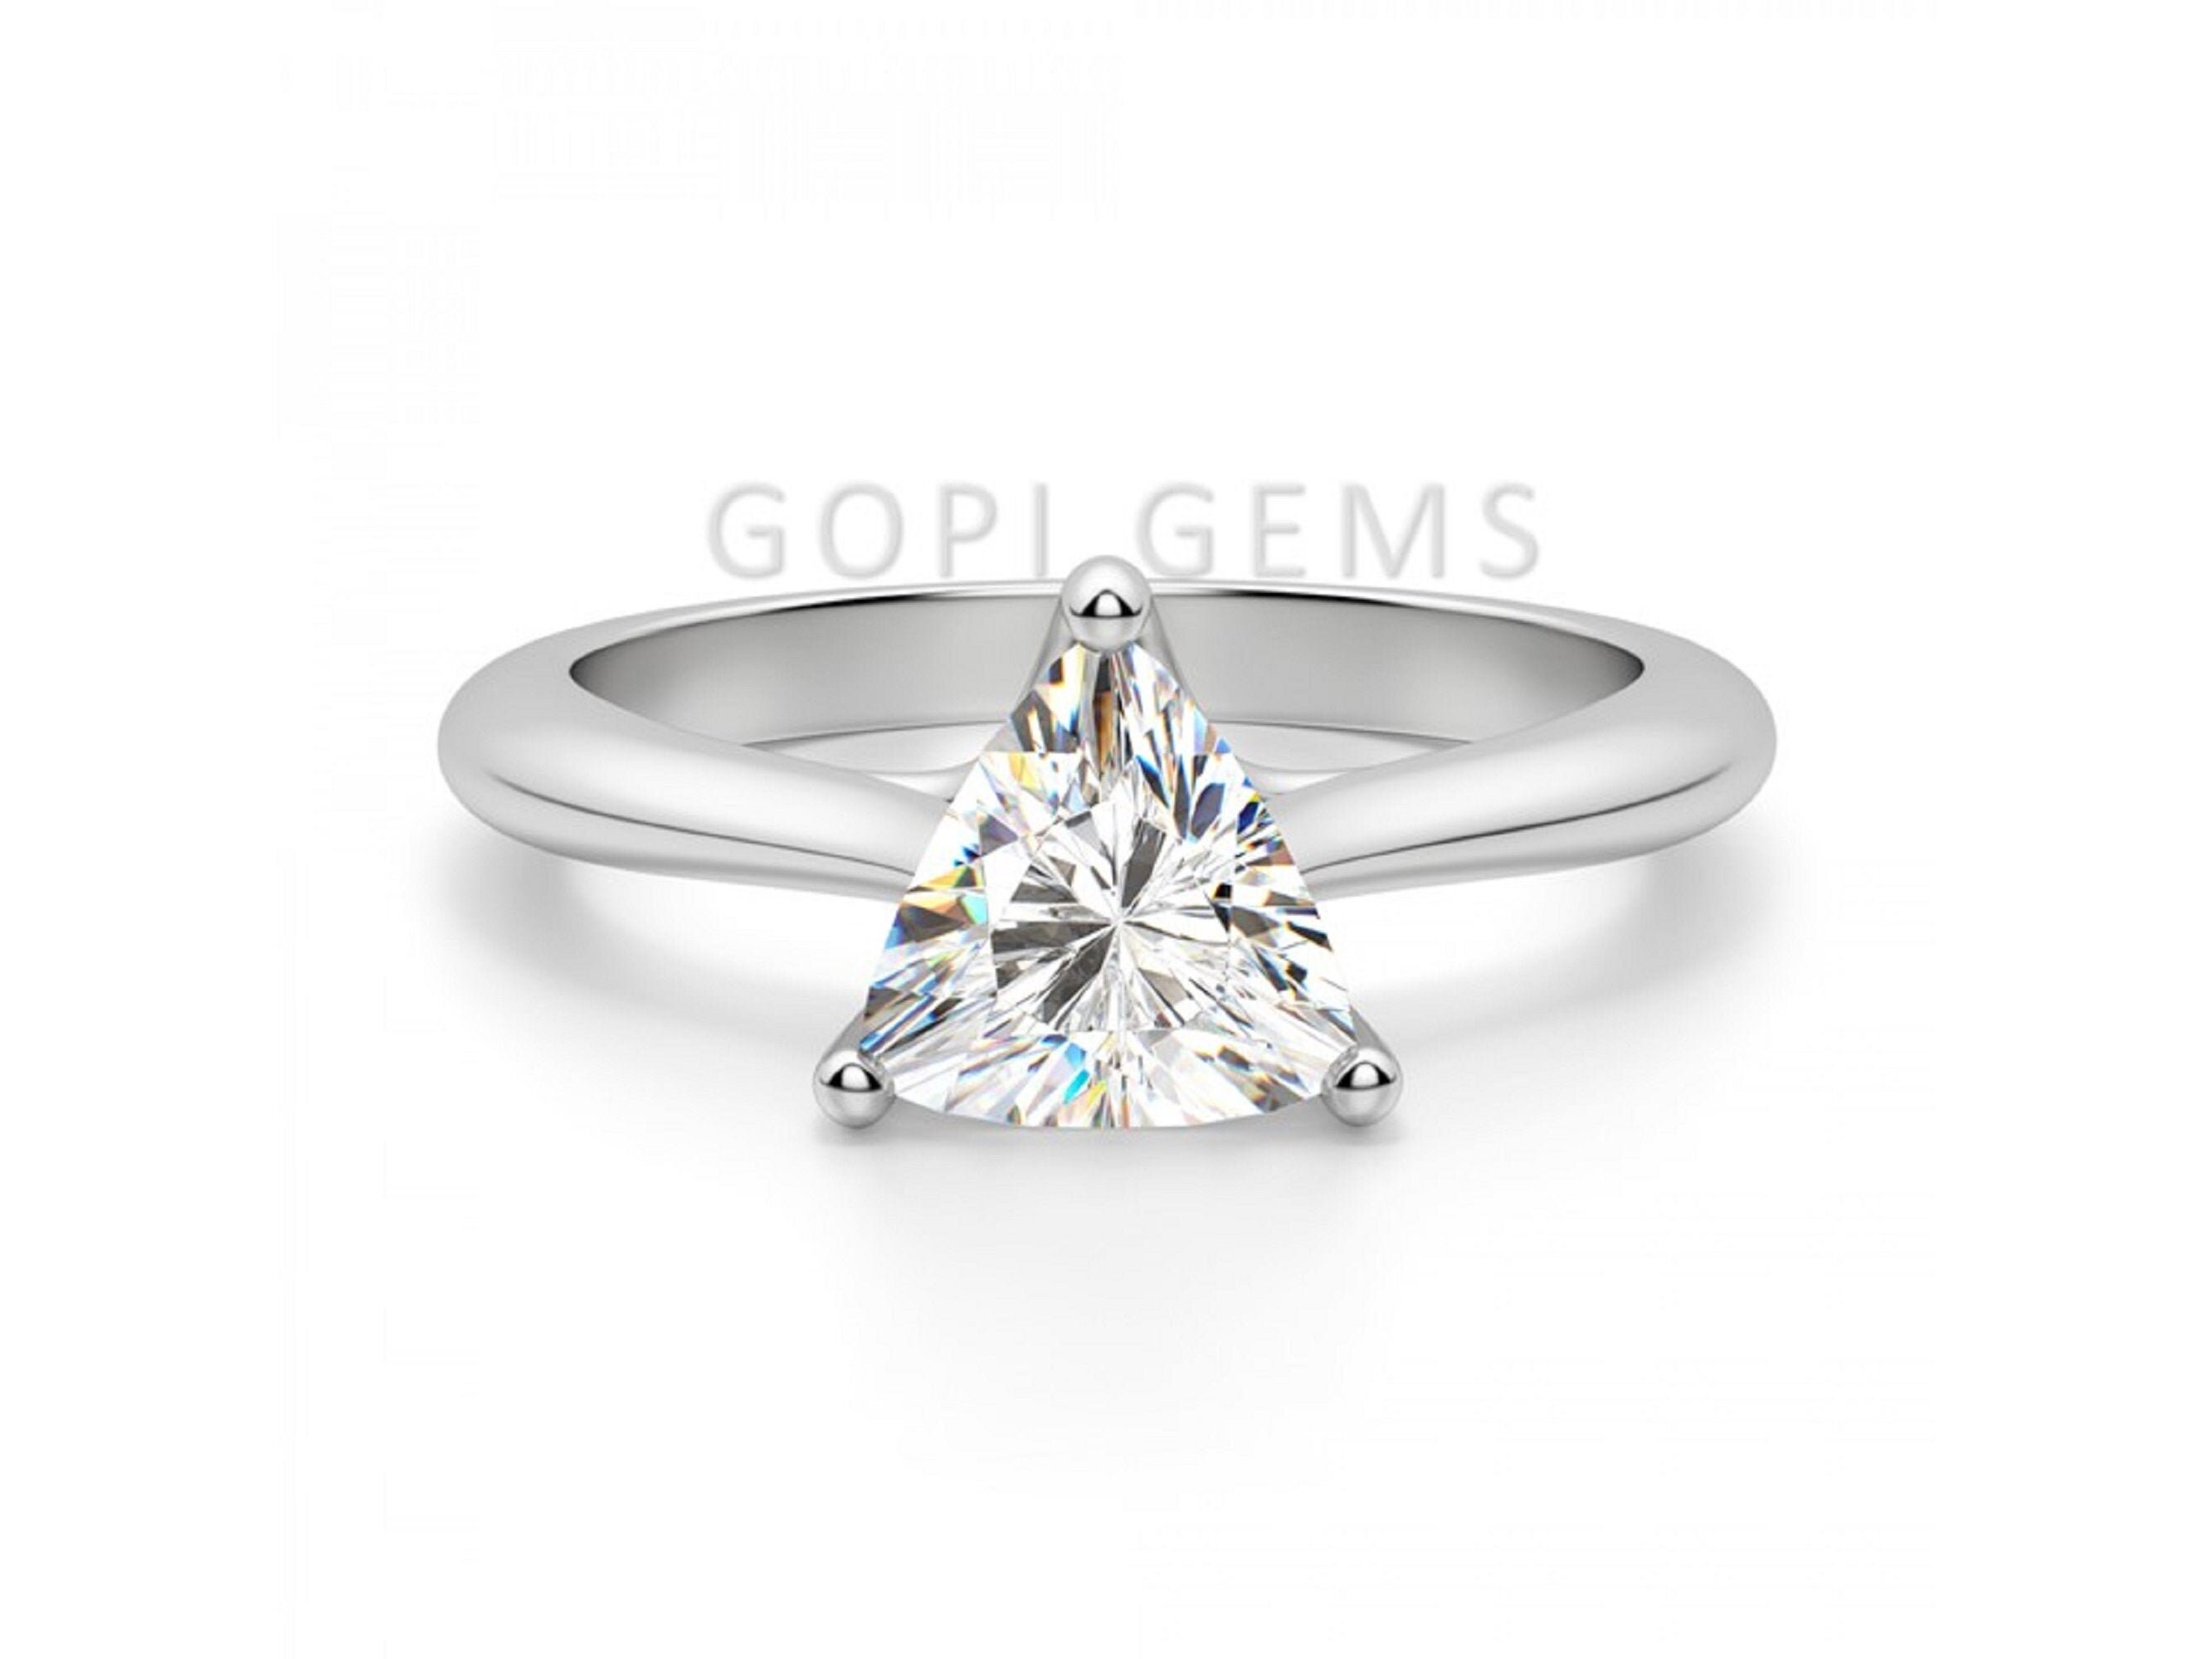 Colorless Moissanite Diamond Engagement Ring East West Accented Basket Trillion Cut 3.20Ct Anniversary Gift 10KT White Gold Ring